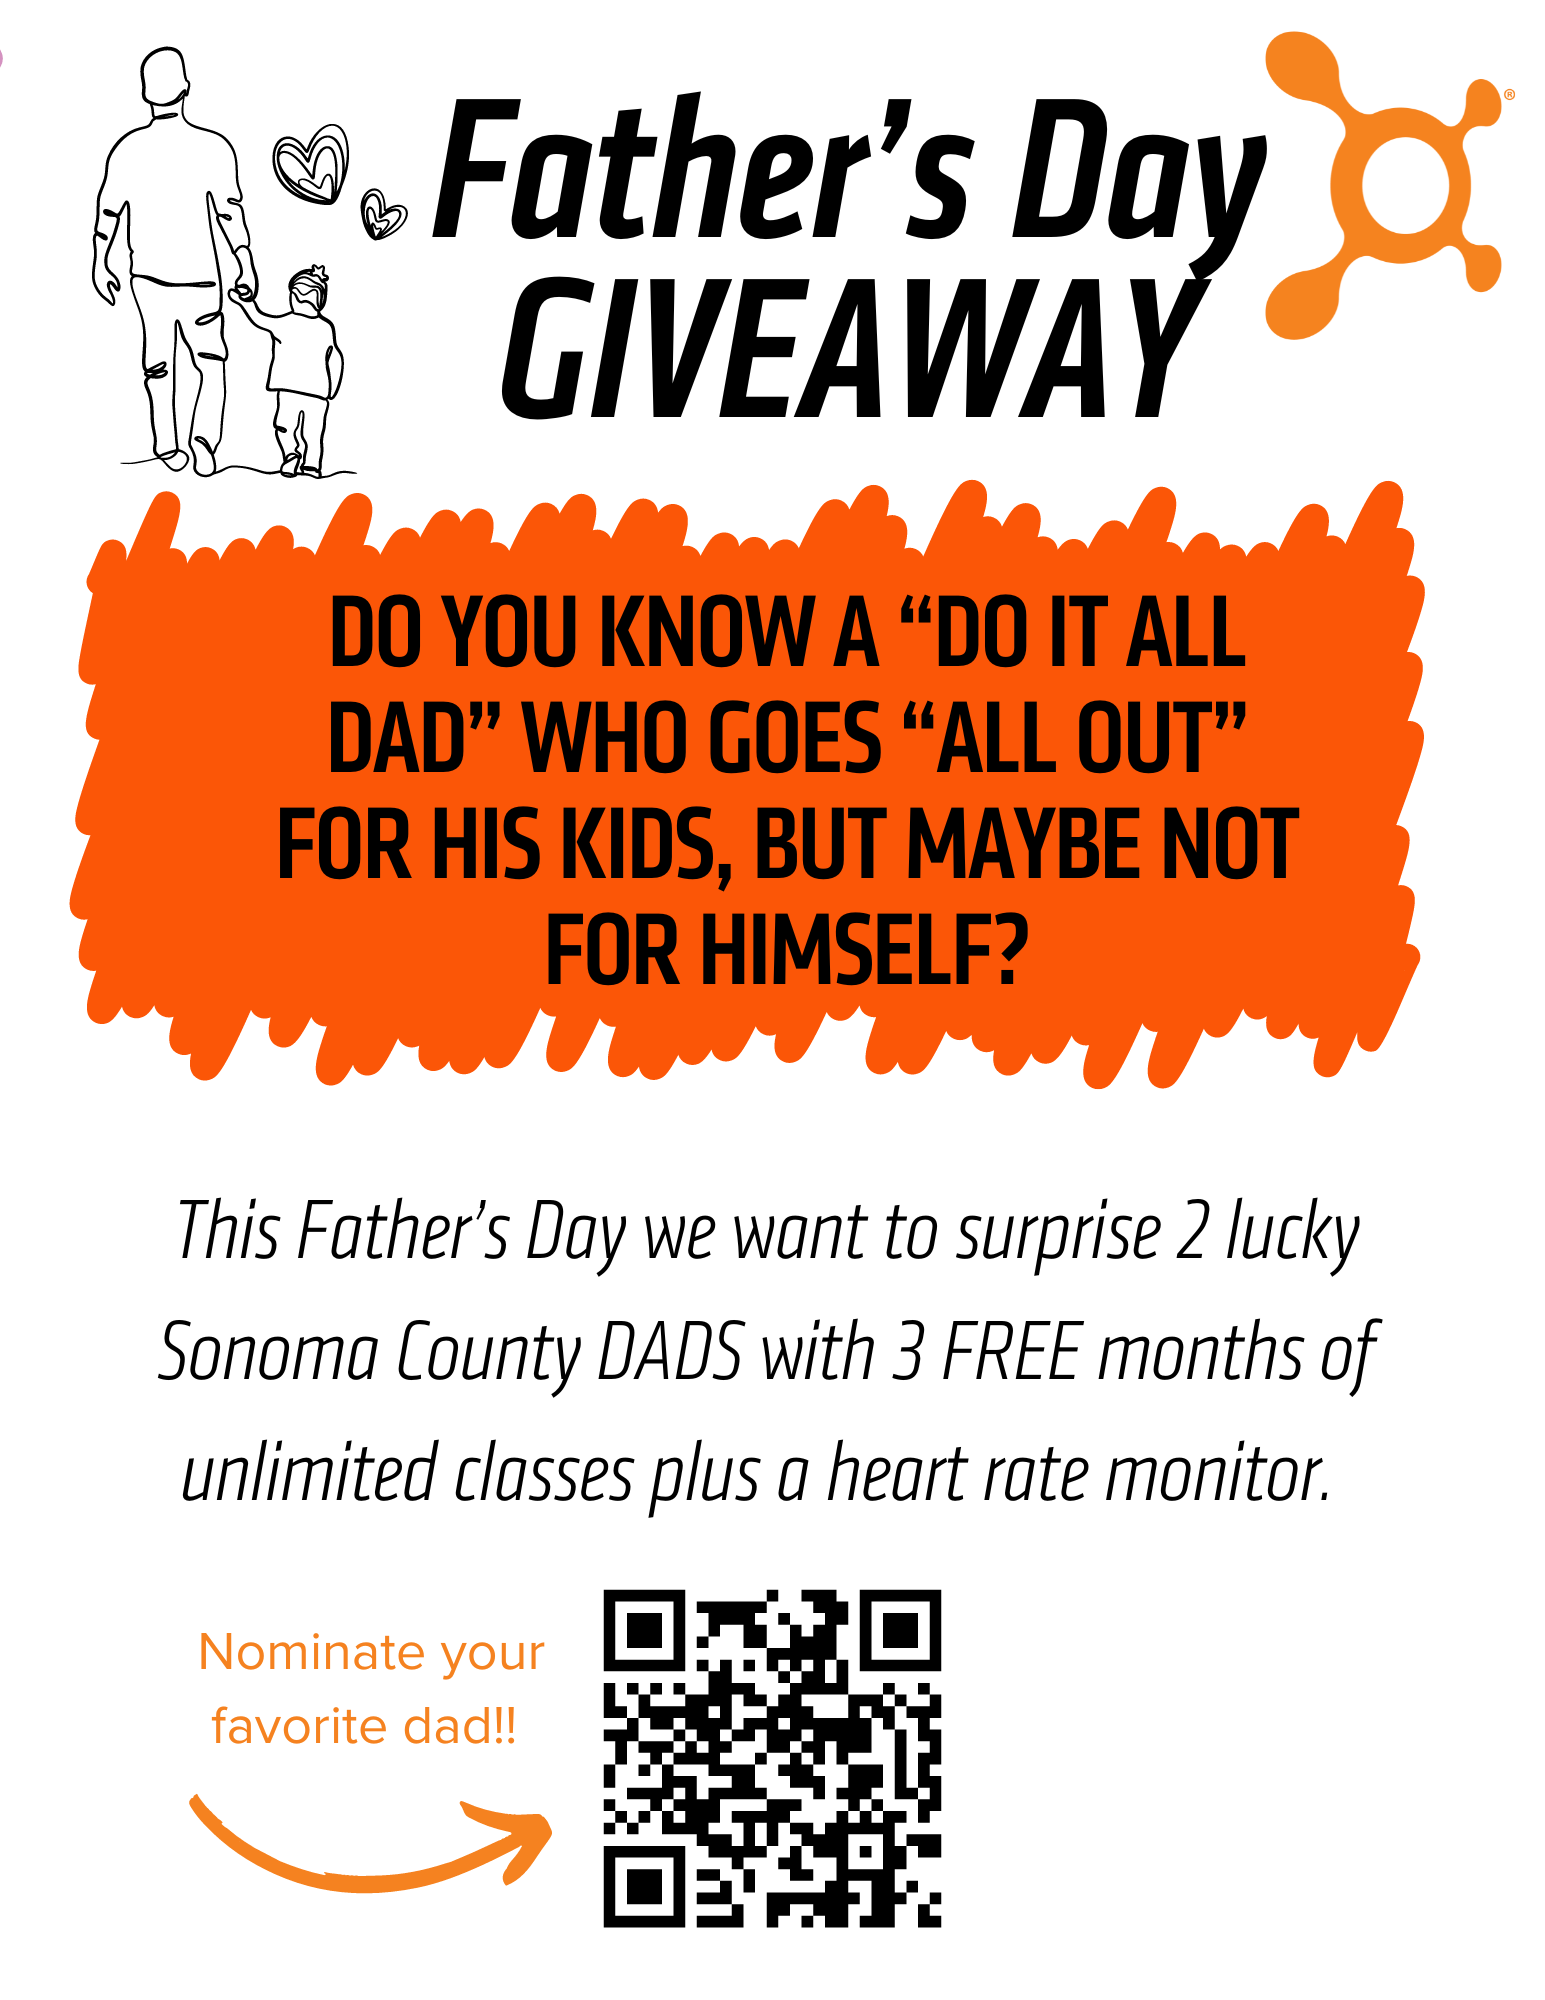 Father's Day Giveaway. This Father's Day Orange Theory is giving away 3 Free months of unlimited classes plus a heart rate monitor to 2 lucky Sonoma County DADS . Scan the QR code to enter. See Orange Theory for more info.